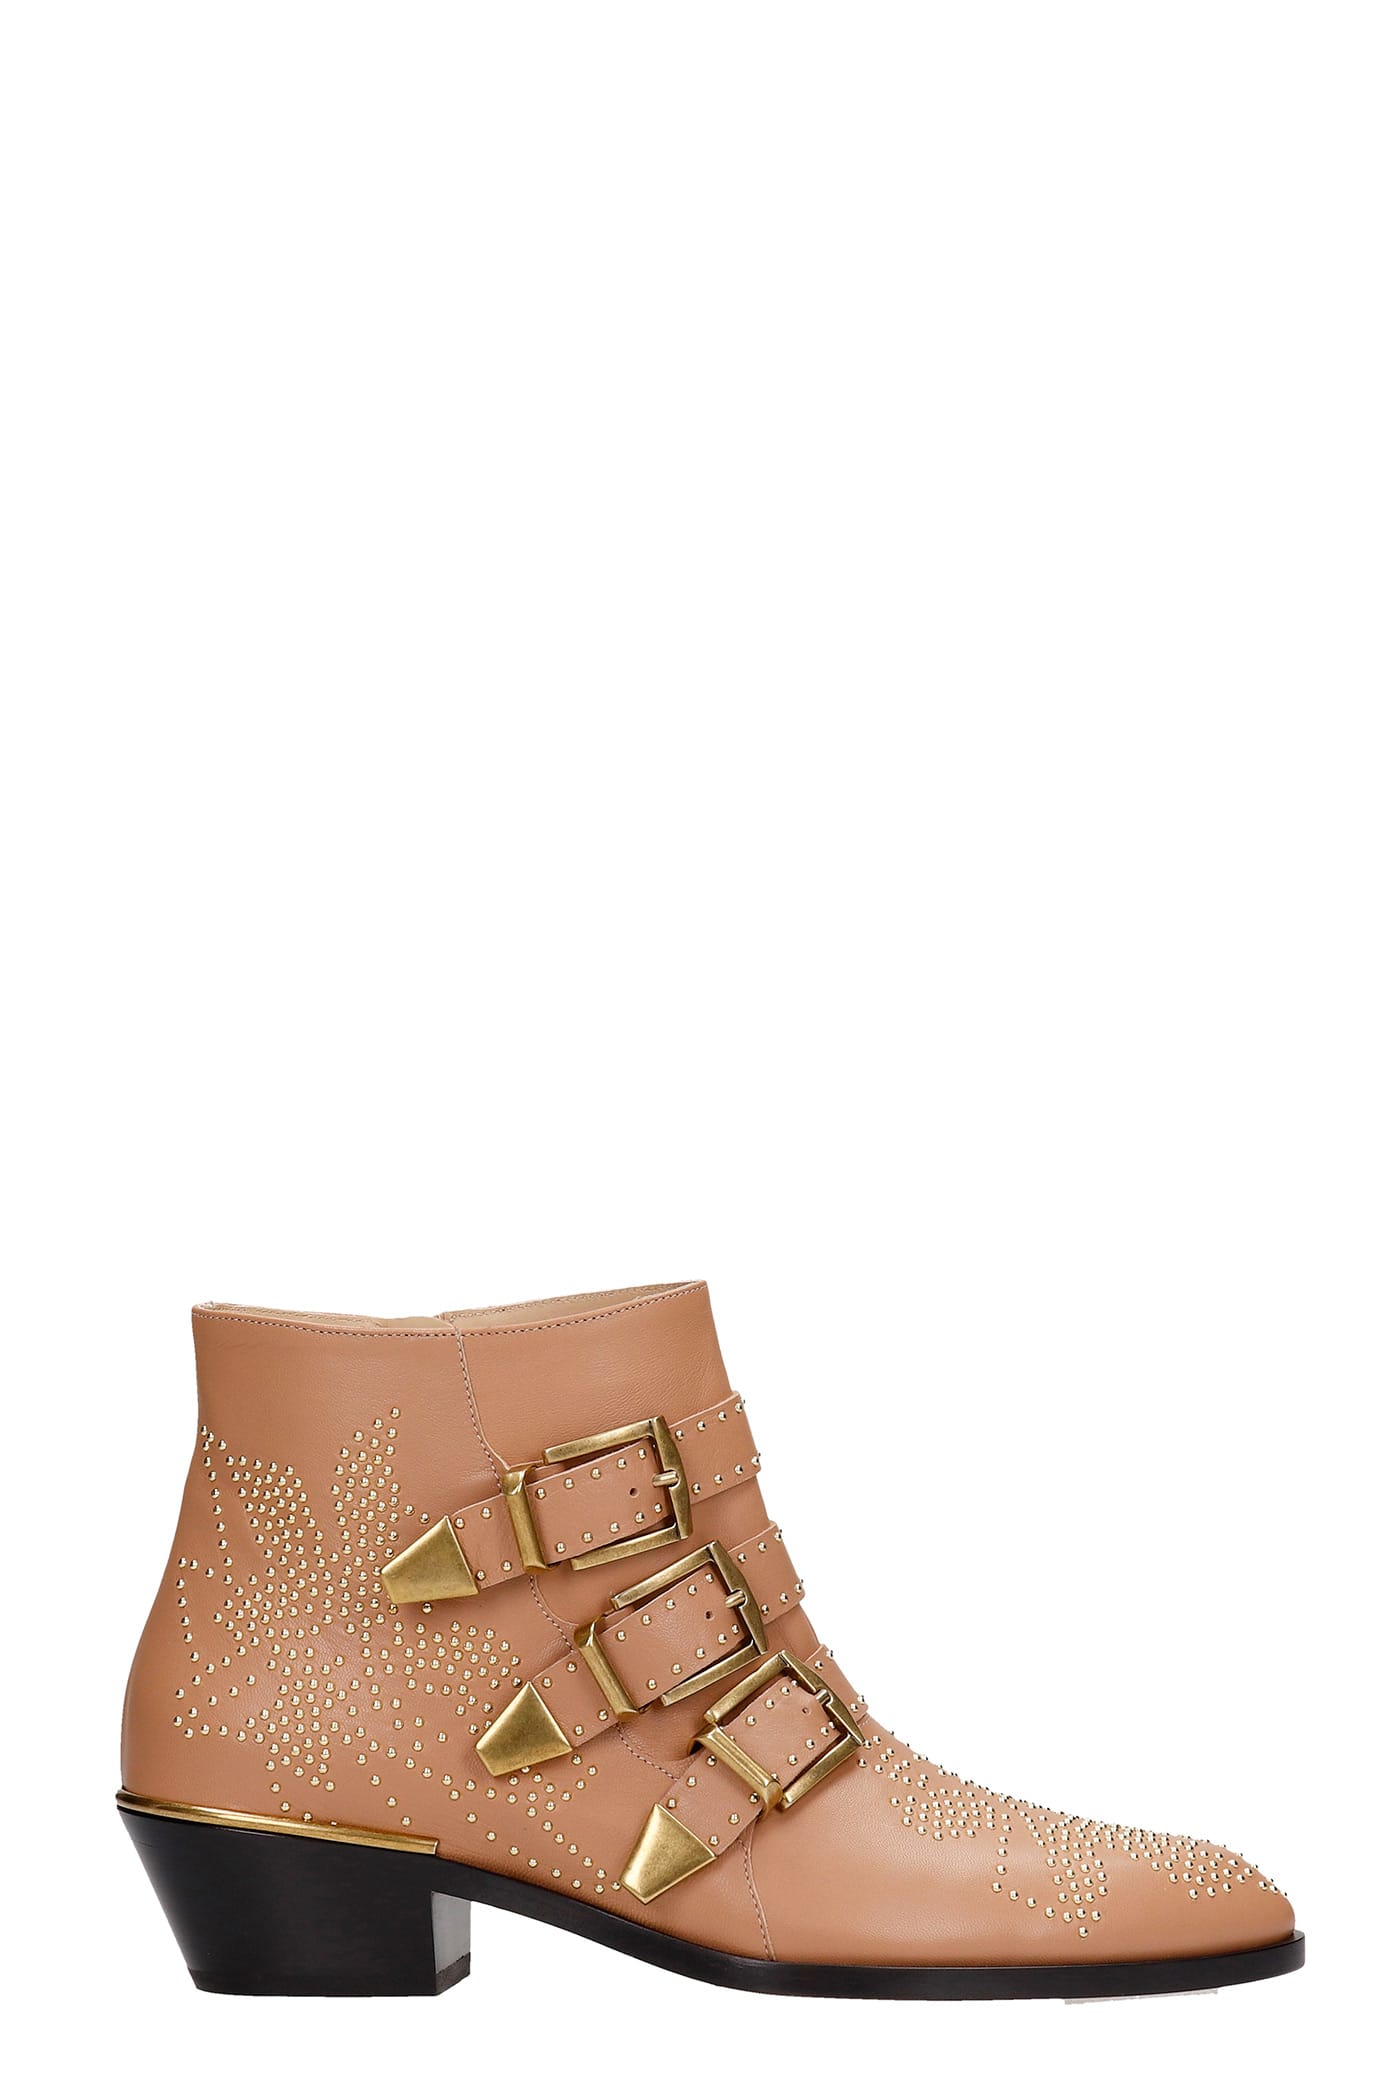 Chloé Susanna Low Heels Ankle Boots In Powder Leather